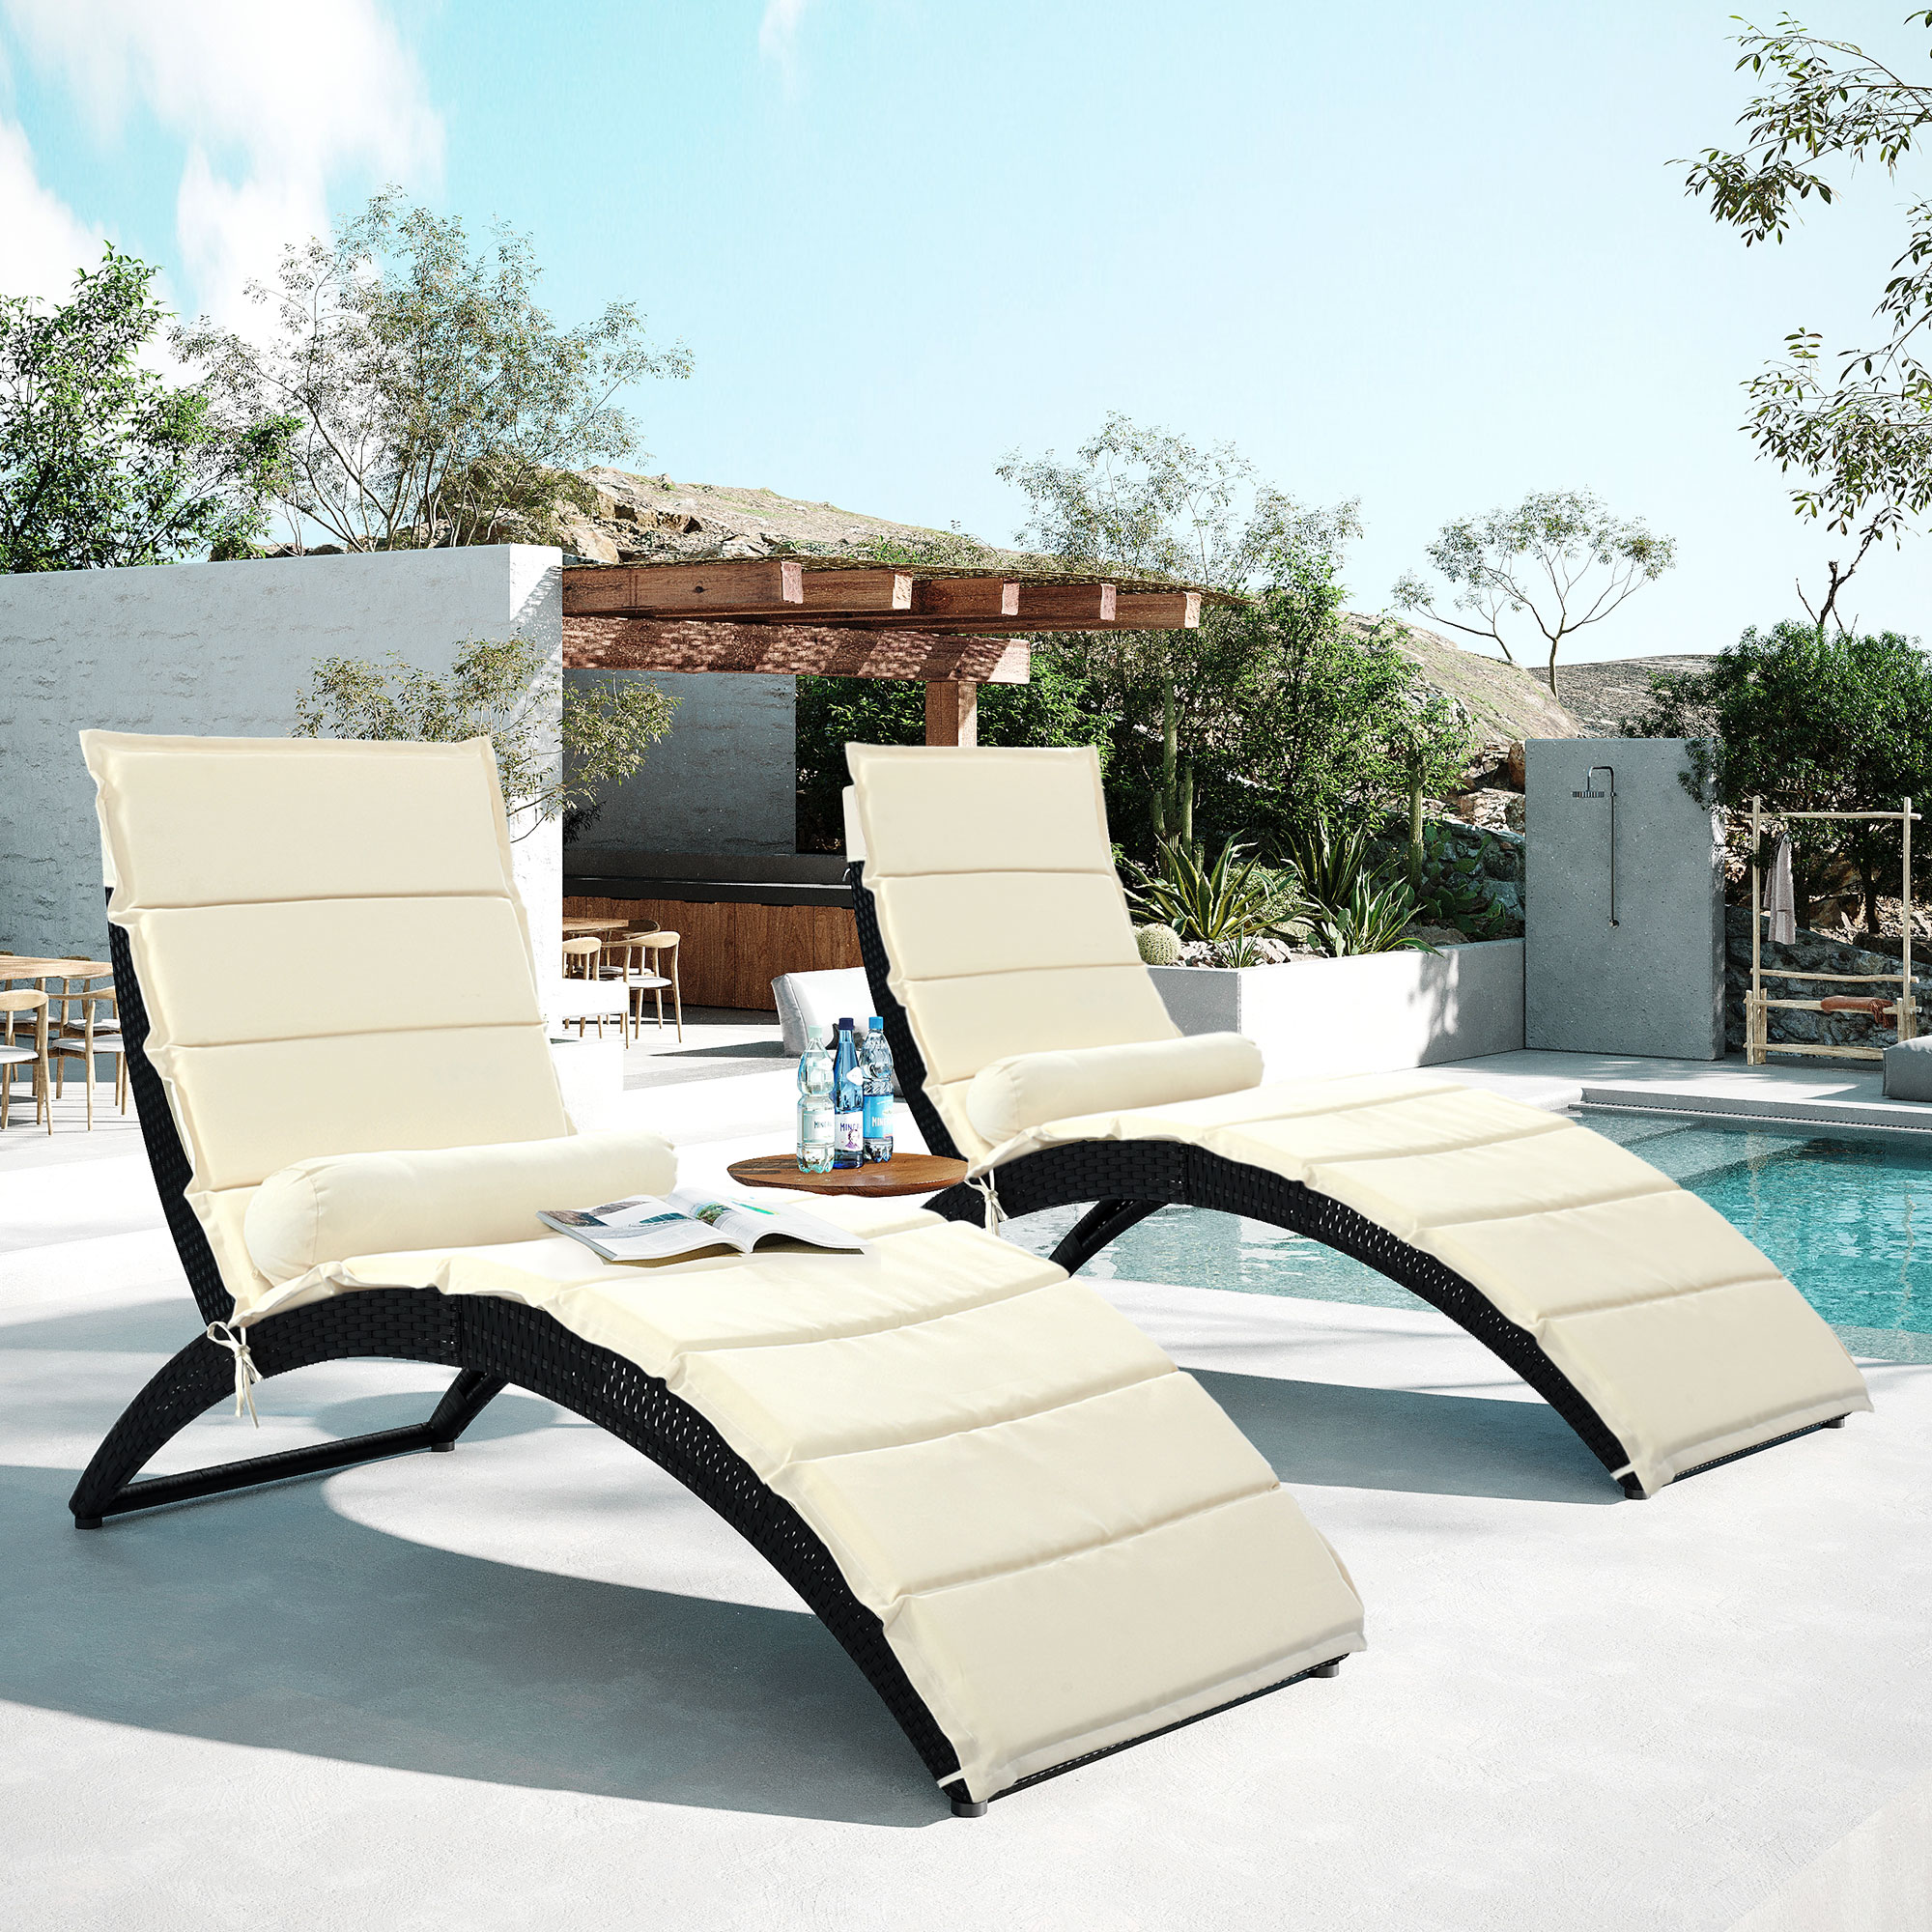 Sesslife 2-PCS Chaise Lounge Chairs for Outside, Patio Adjustable Lounge Chairs with Table Outdoor Rattan Wicker Pool Chaise Lounge Chairs Cushioned Poolside Folding Chaise Lounge Set - image 1 of 8